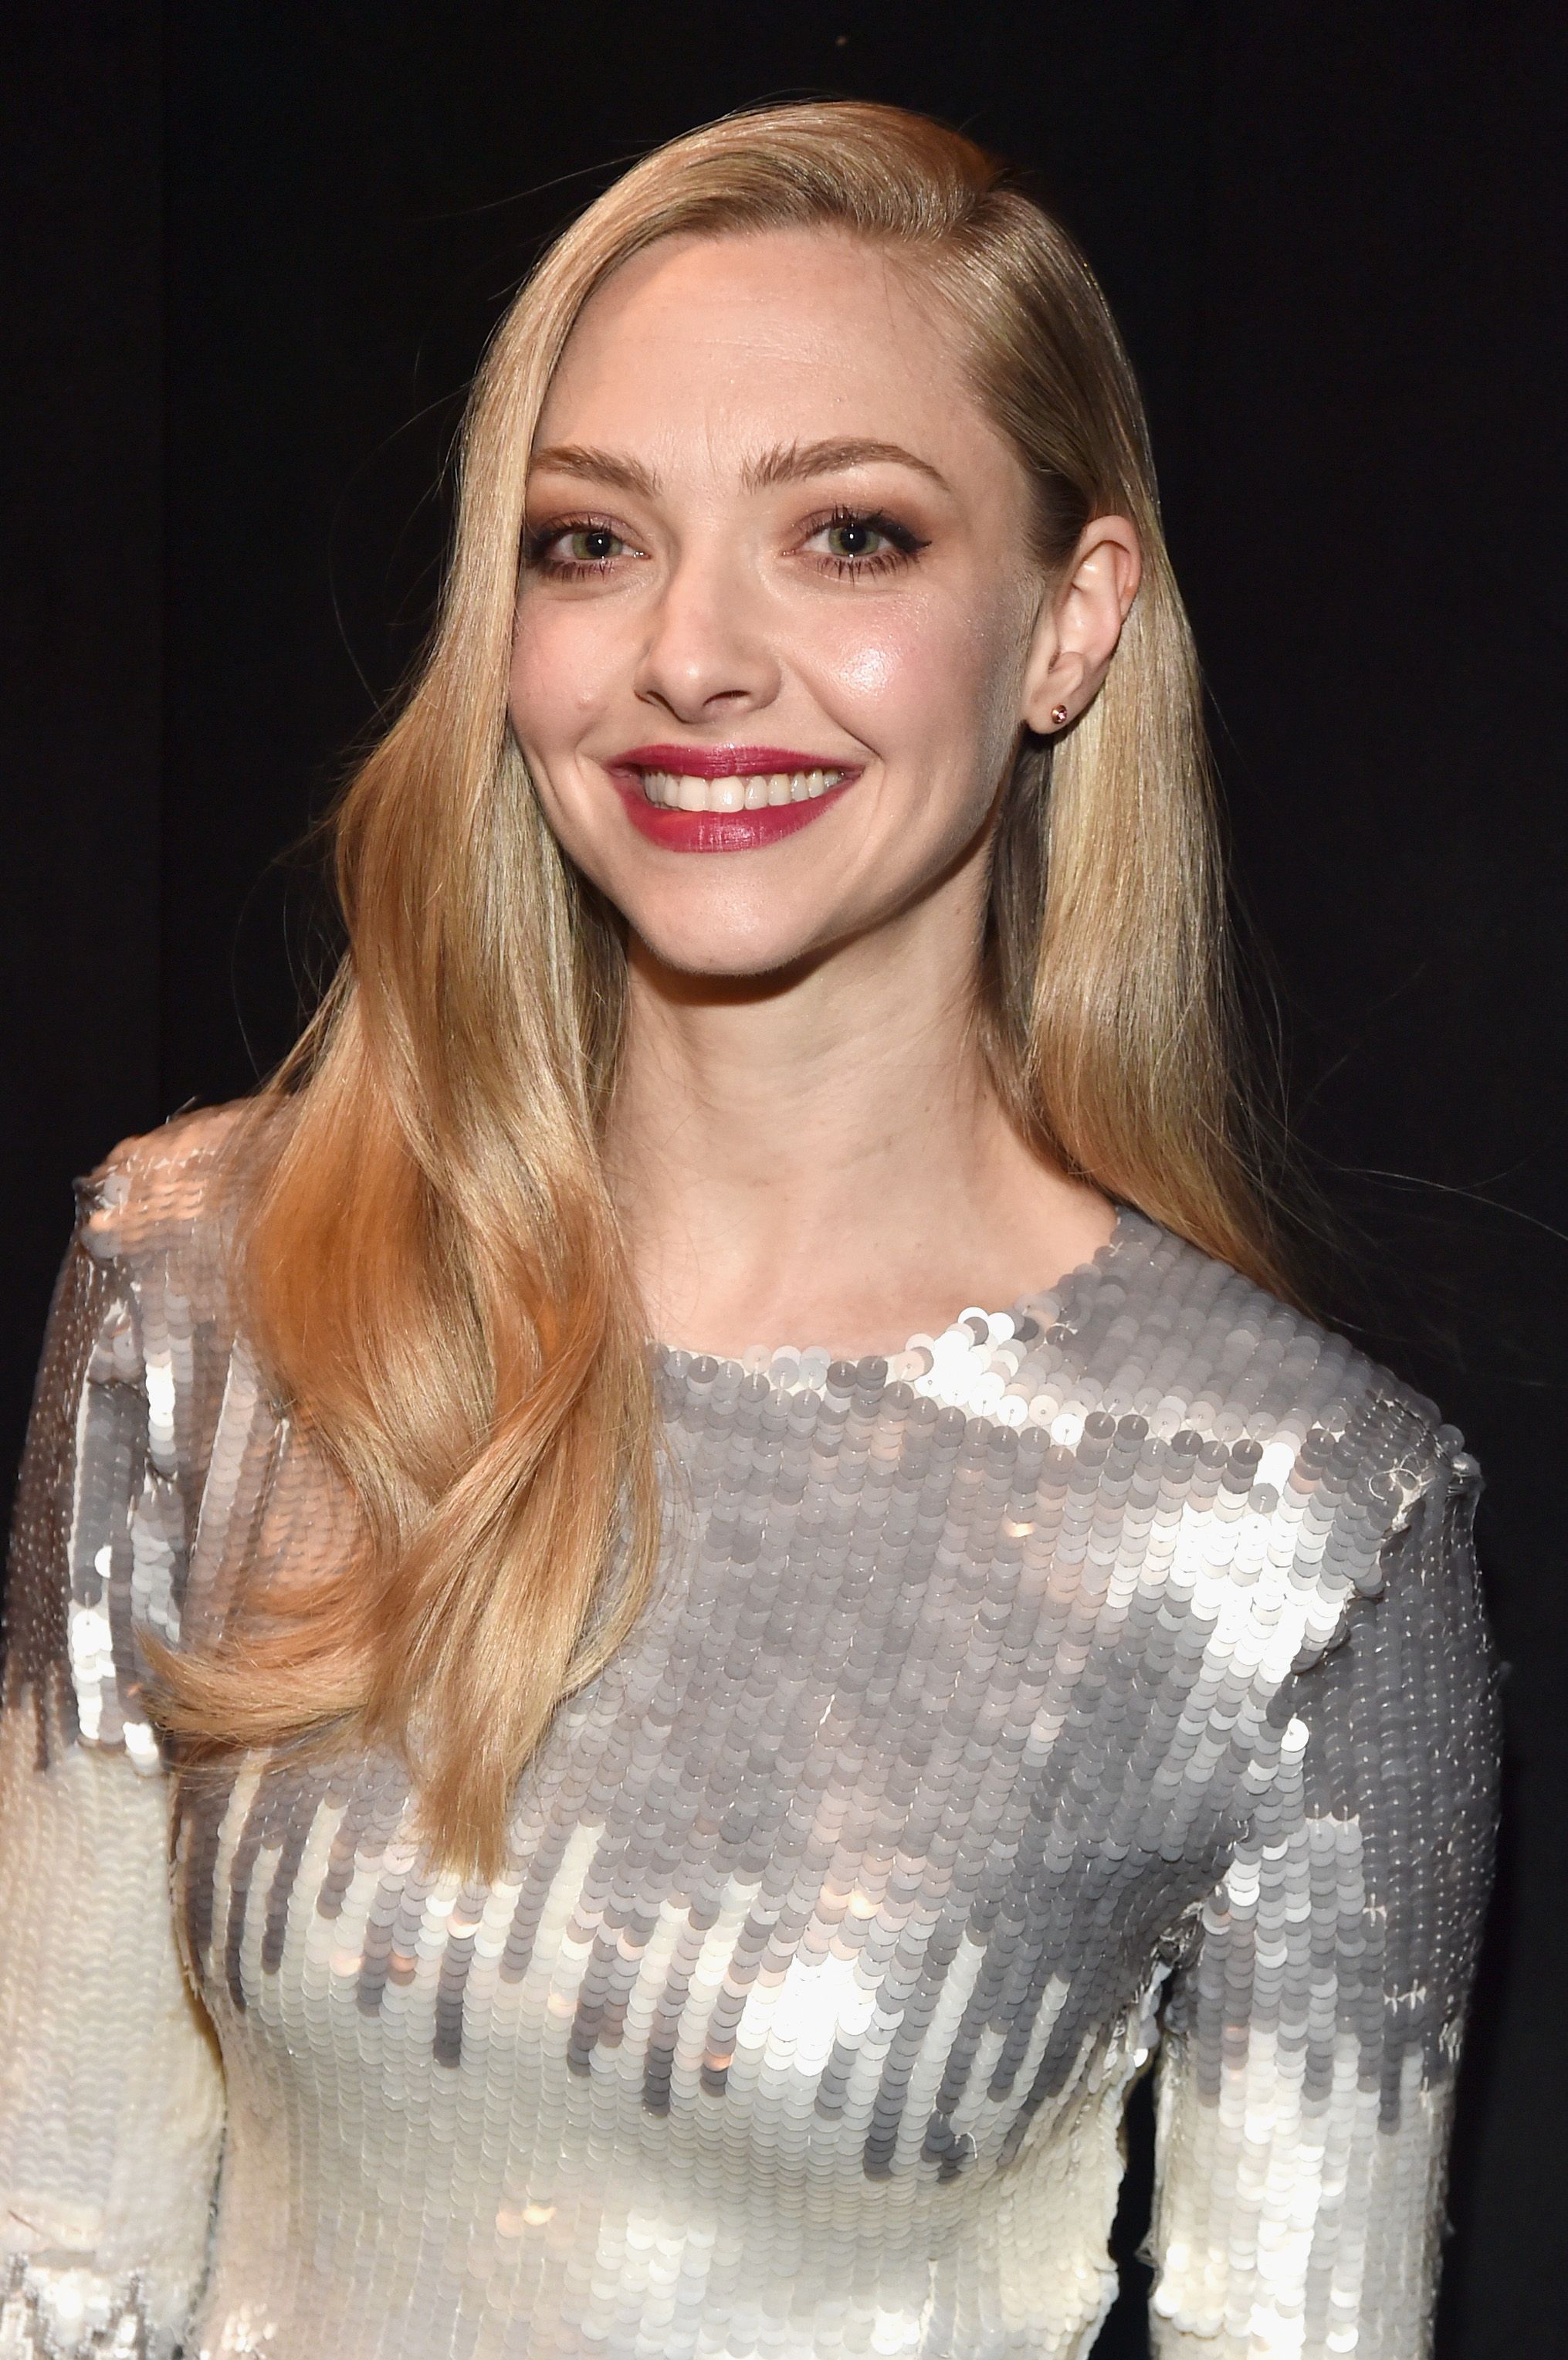 Amanda Seyfried during CinemaCon 2018 Universal Pictures Invites You to a Special Presentation Featuring Footage from its Upcoming Slate at The Colosseum at Caesars Palace during CinemaCon, the official convention of the National Association of Theatre Owners, on April 25, 2018 in Las Vegas, Nevada. | Source: Getty Images